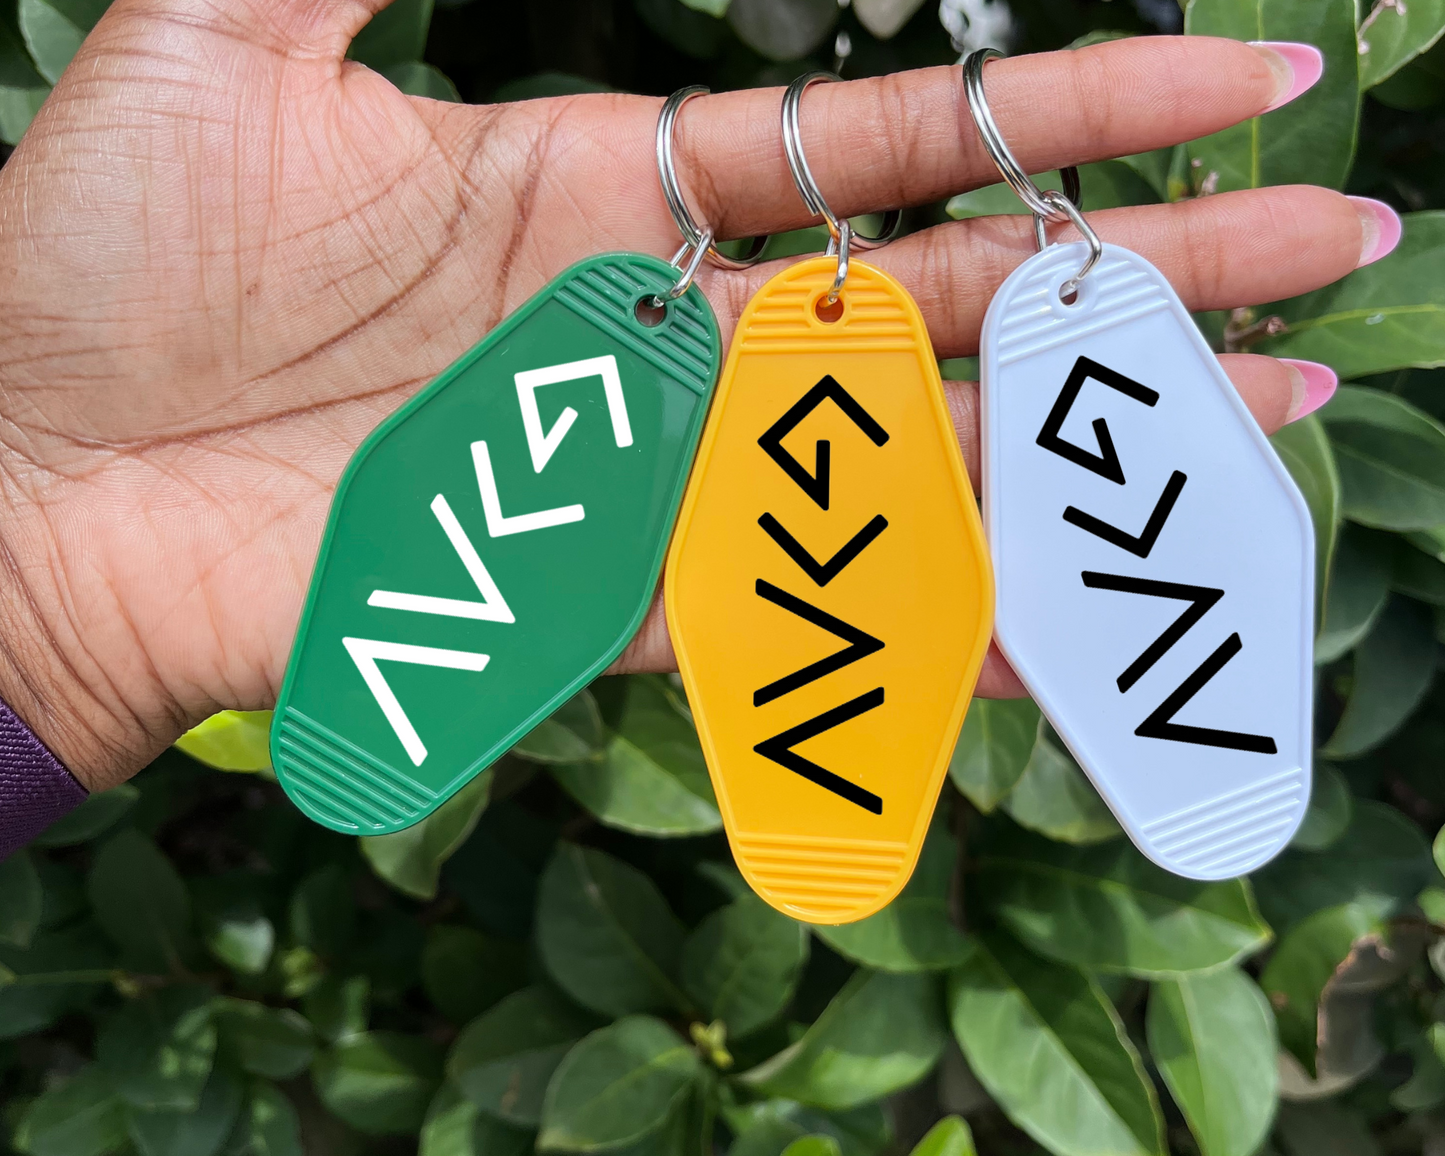 God Is Greater Than The Highs And Lows Keychain - The Glam Thangz